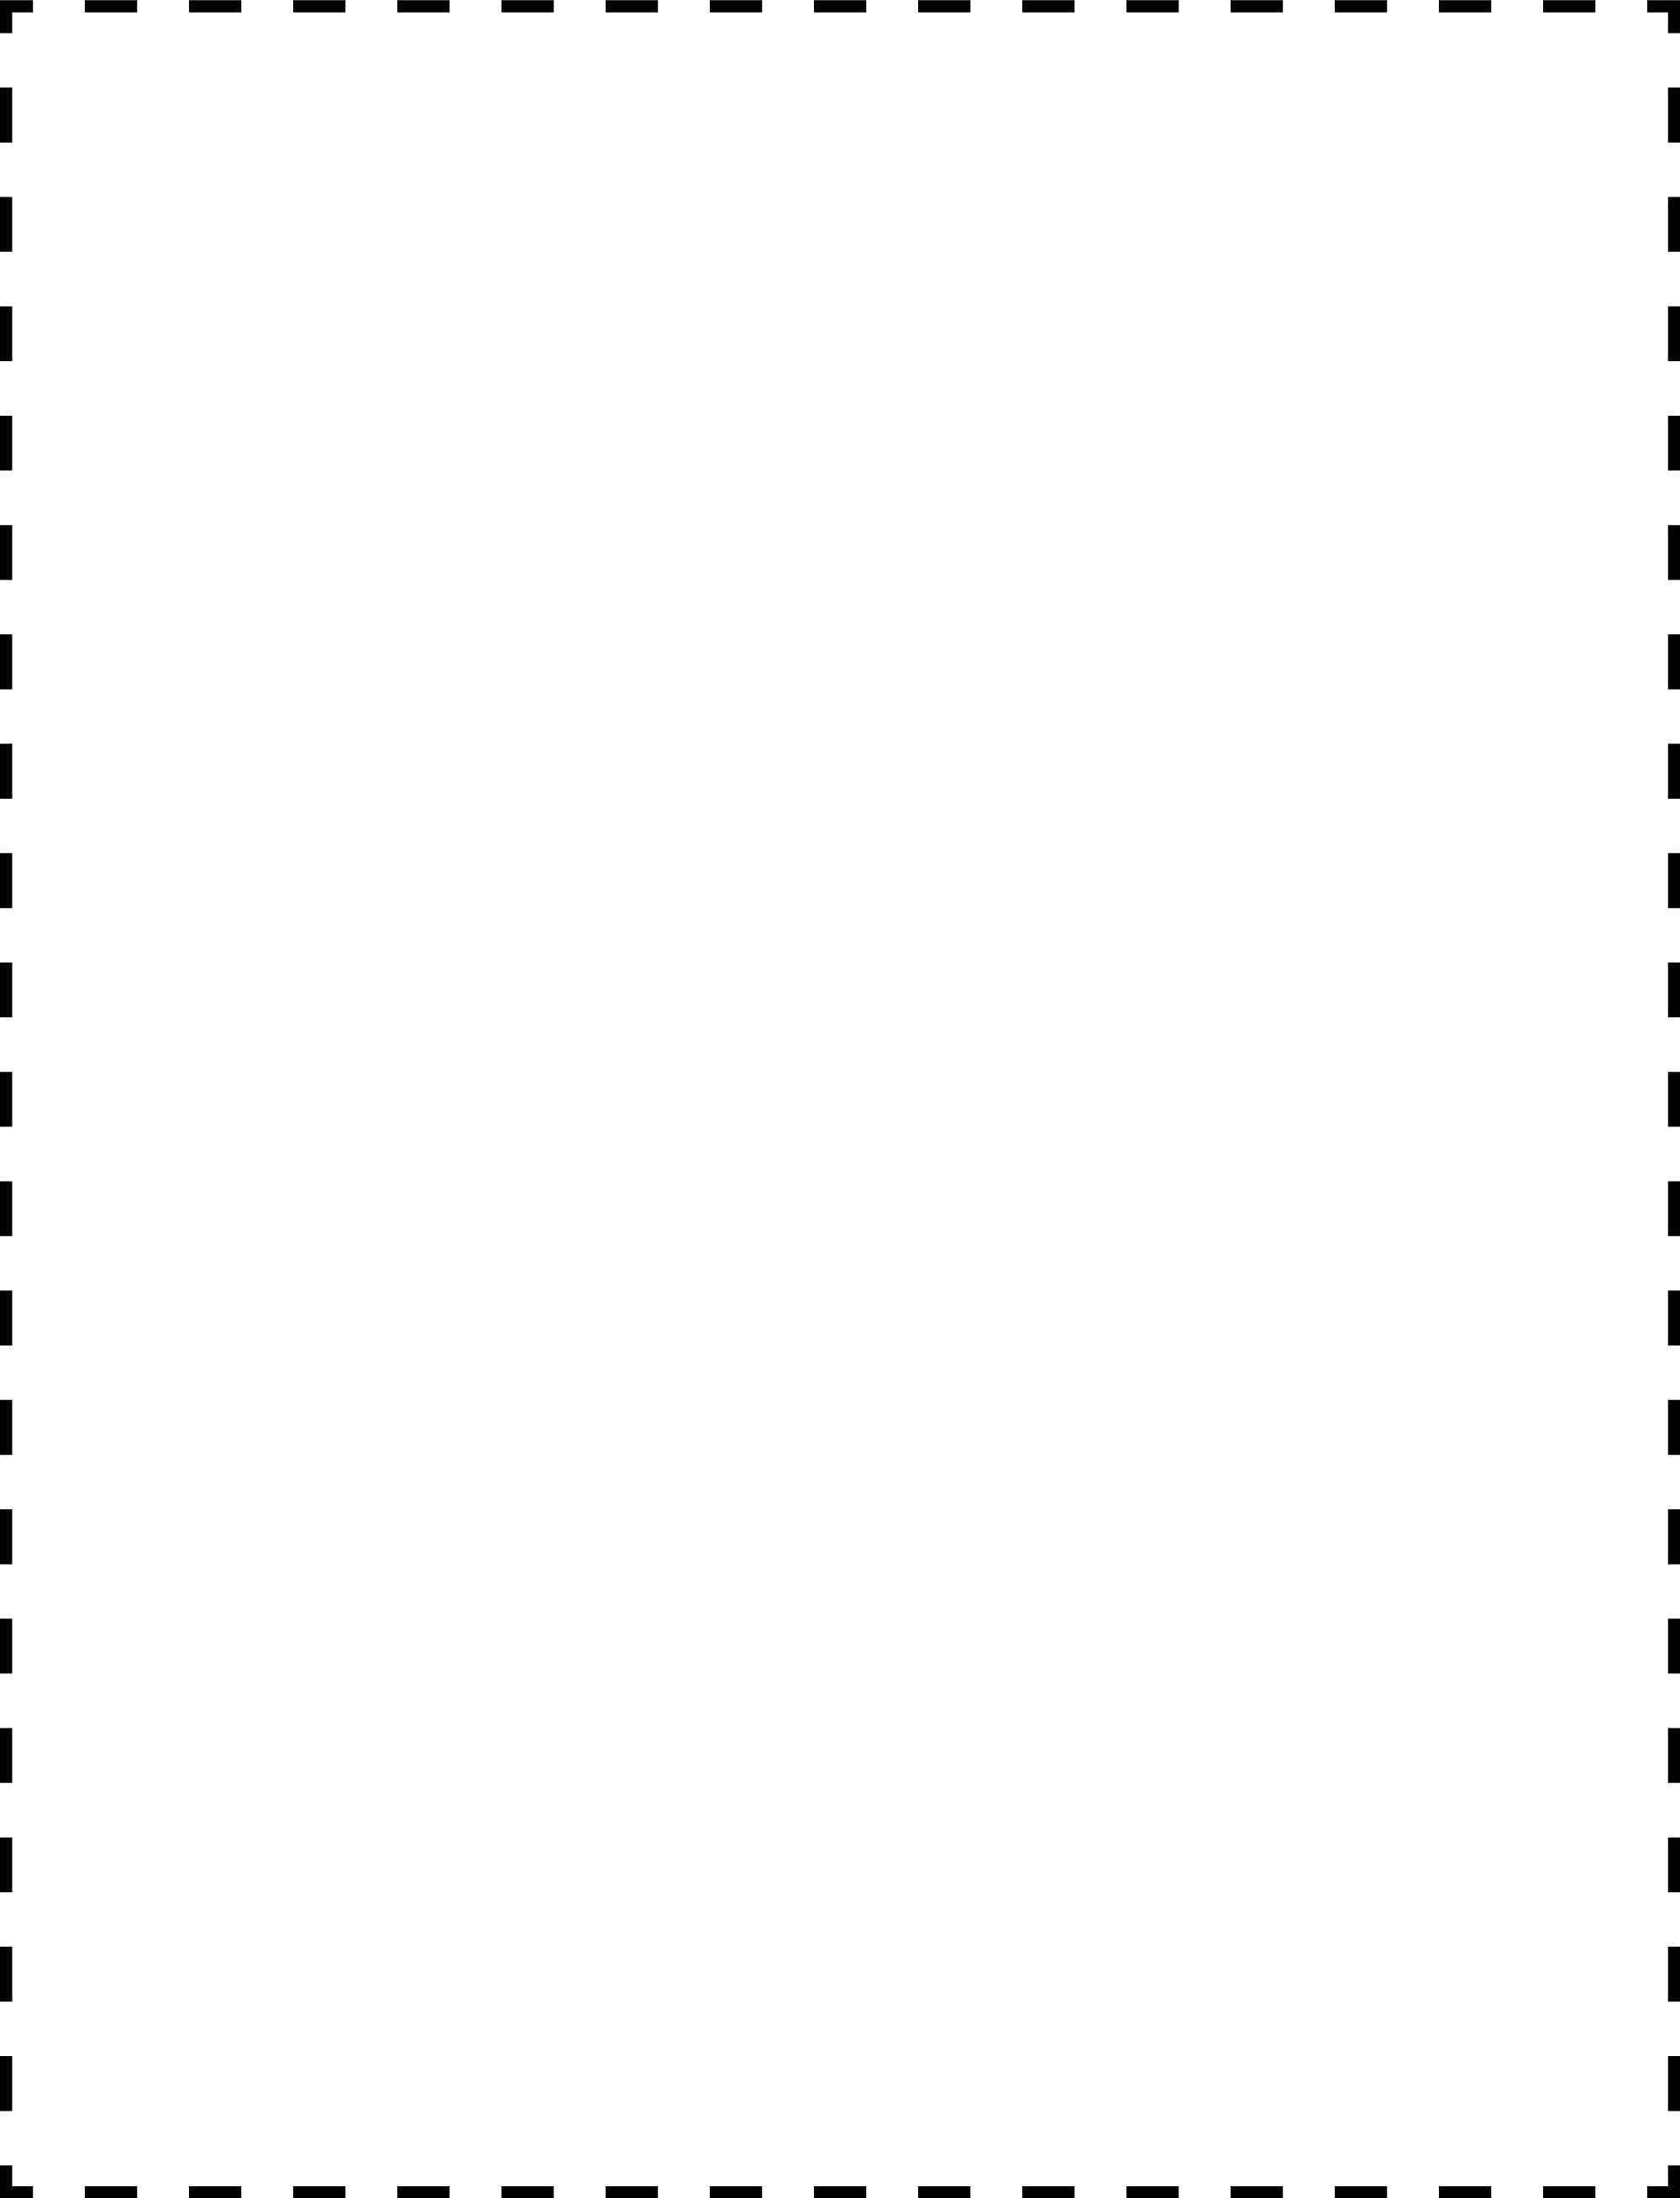 2718-coupon-outline-4x5-k.png